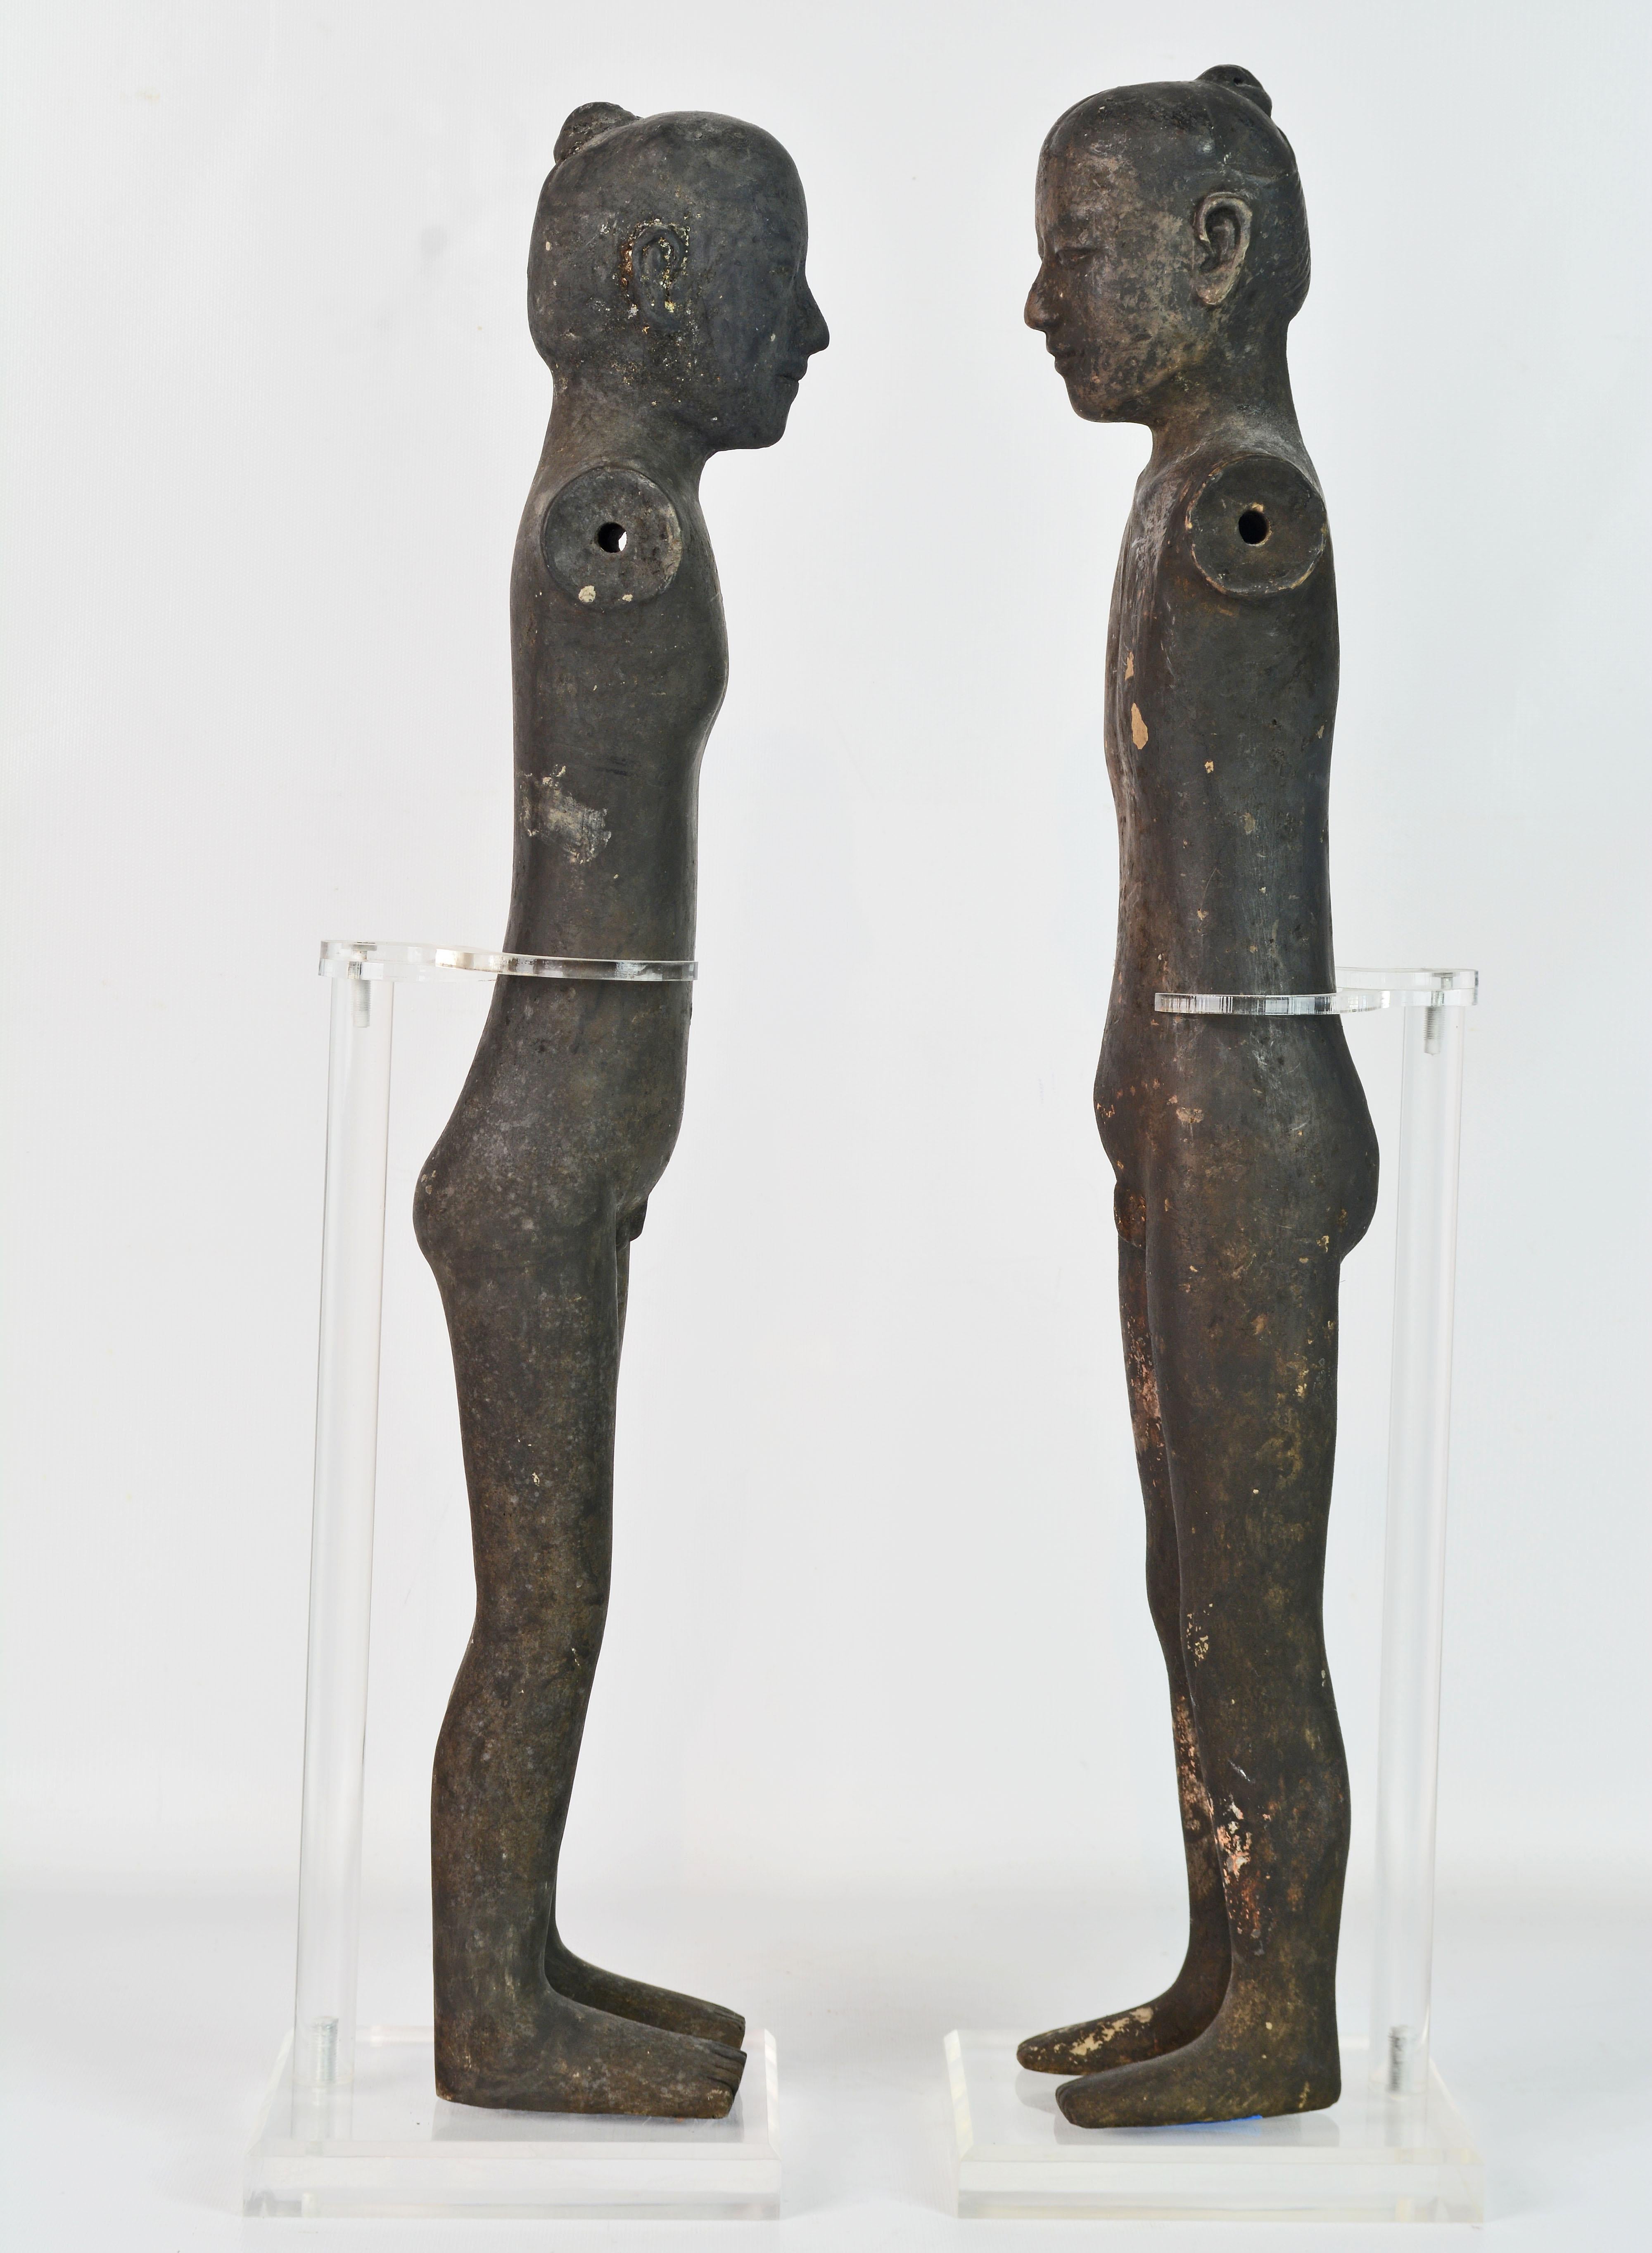 Two Chinese style of Han Dynasty models of tall slender men called stick figures because of their elongated shape.
These naked figures would originally have had clothing and wooden arms, which have long since perished. Their faces are expressive,